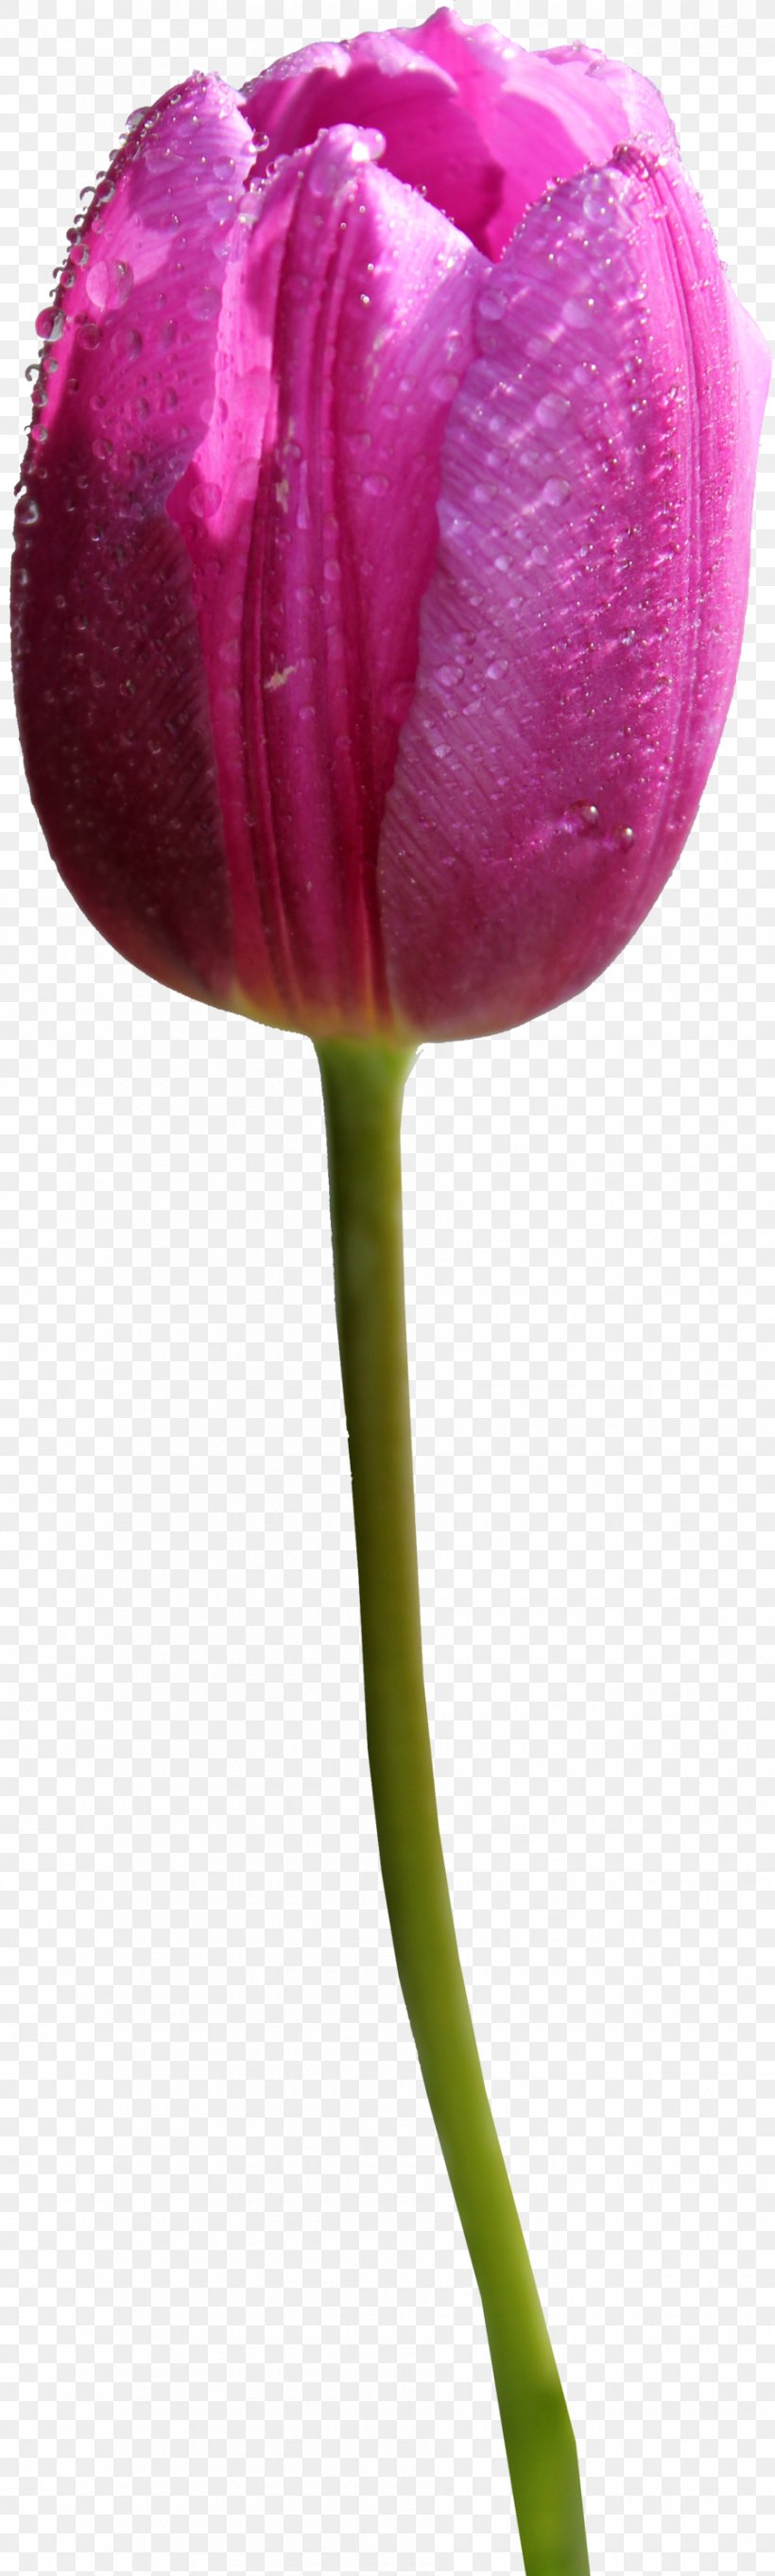 Skagit Valley Tulip Festival Clip Art, PNG, 900x2991px, Skagit Valley Tulip Festival, Bud, Close Up, Cut Flowers, Flower Download Free